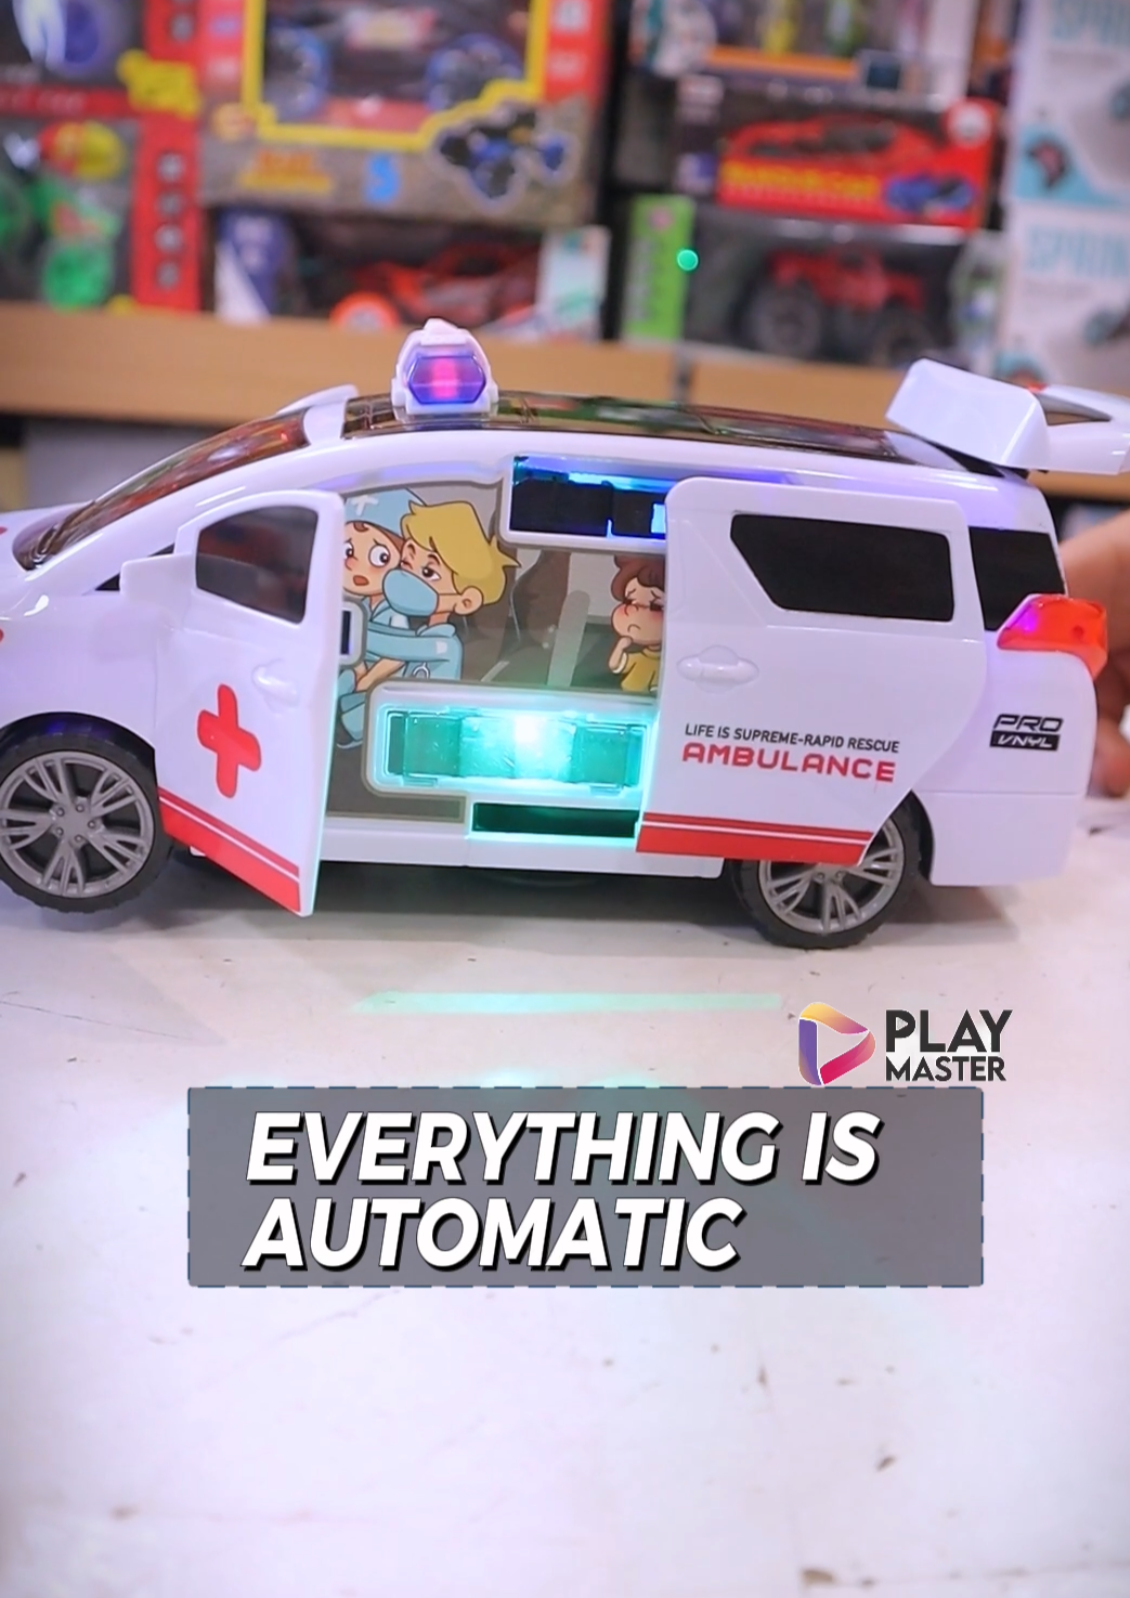 Dancing big size Ambulance Toy Car with 3d Light & Siren Sound Effects For Kids playmaster toys